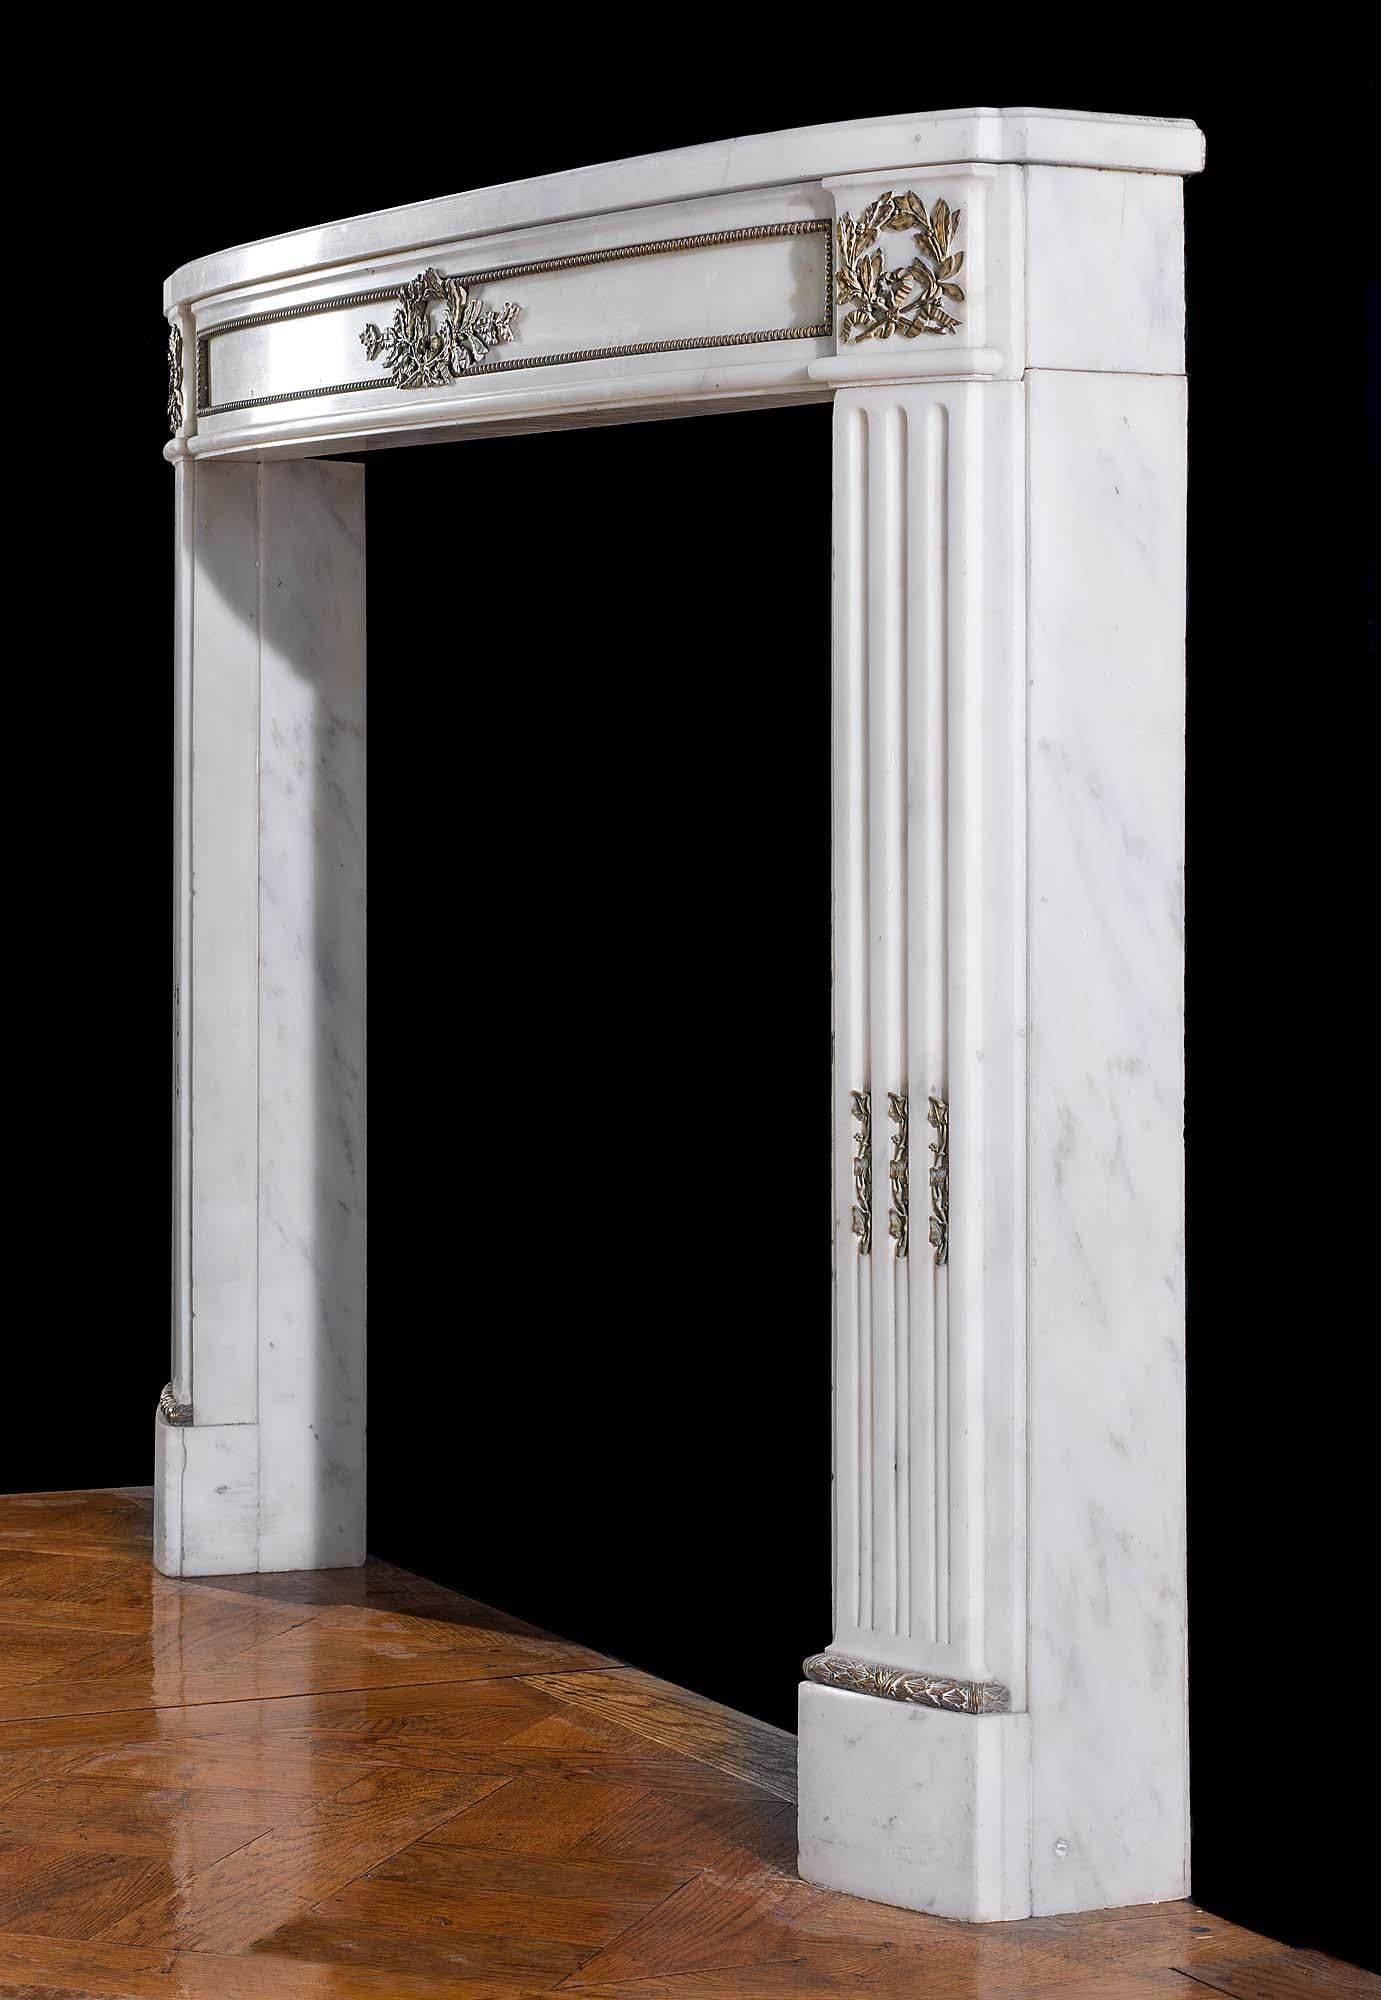 A small finely carved statuary marble Louis XVI antique chimneypiece with a gently curved bow fronted shelf and frieze adorned with applied ormolu ornamentation in the form of laurel wreaths to the frieze, endblocks and the stop fluted jambs.